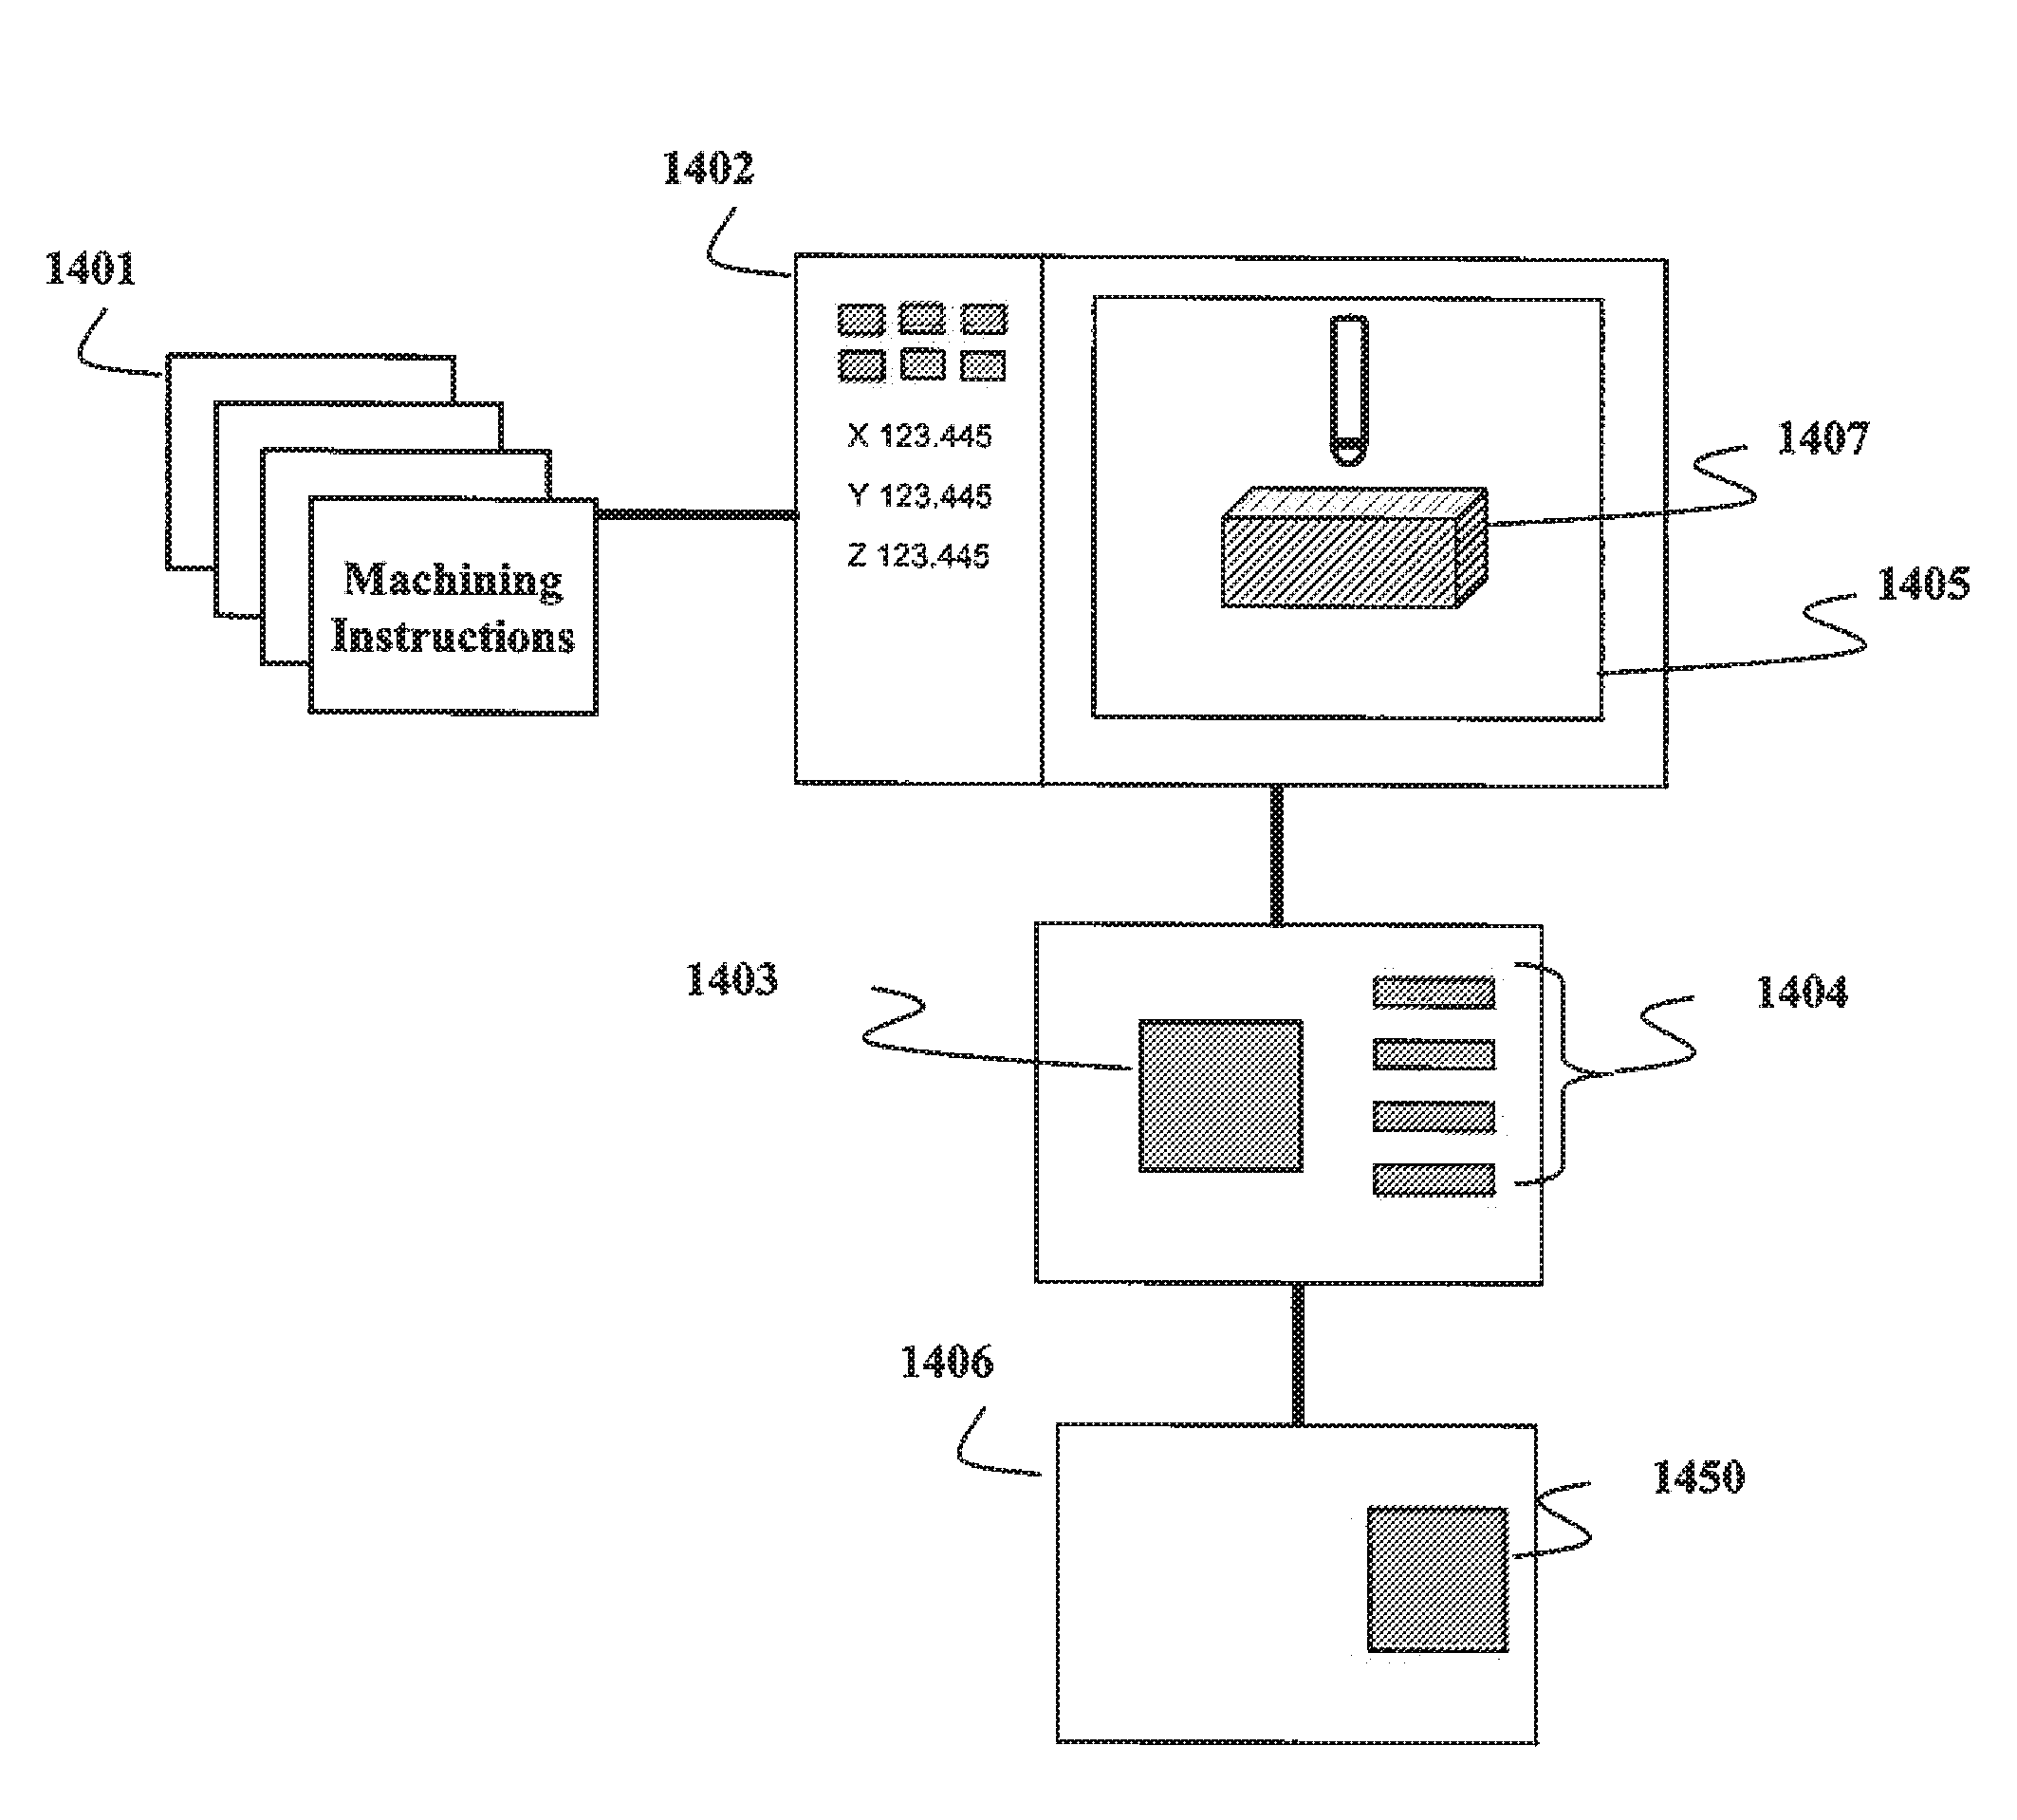 System and Method for Simulating Machining Objects